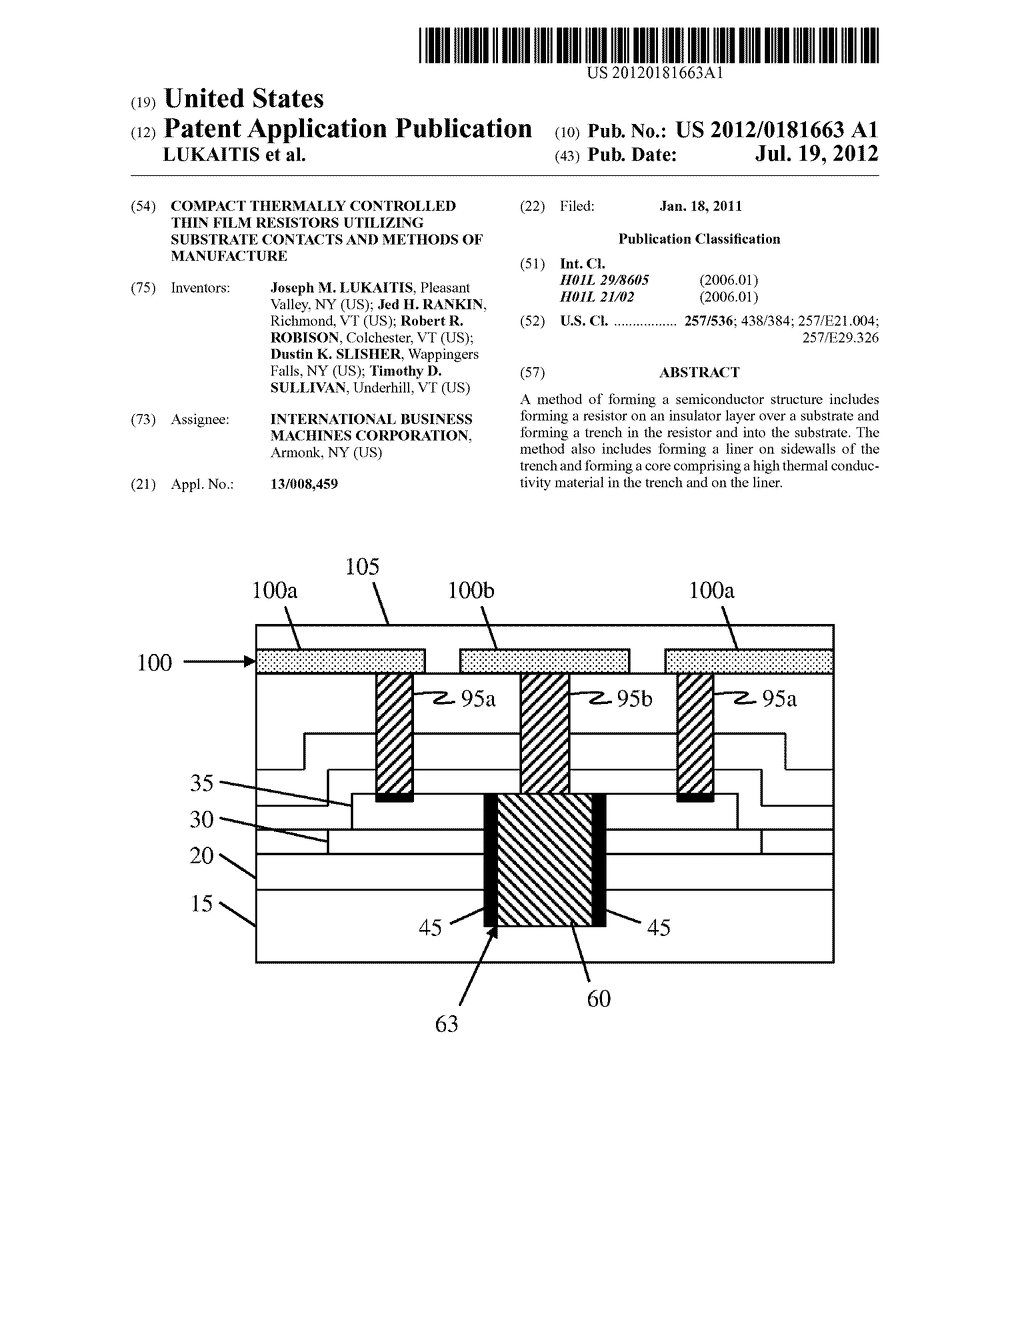 COMPACT THERMALLY CONTROLLED THIN FILM RESISTORS UTILIZING SUBSTRATE     CONTACTS AND METHODS OF MANUFACTURE - diagram, schematic, and image 01